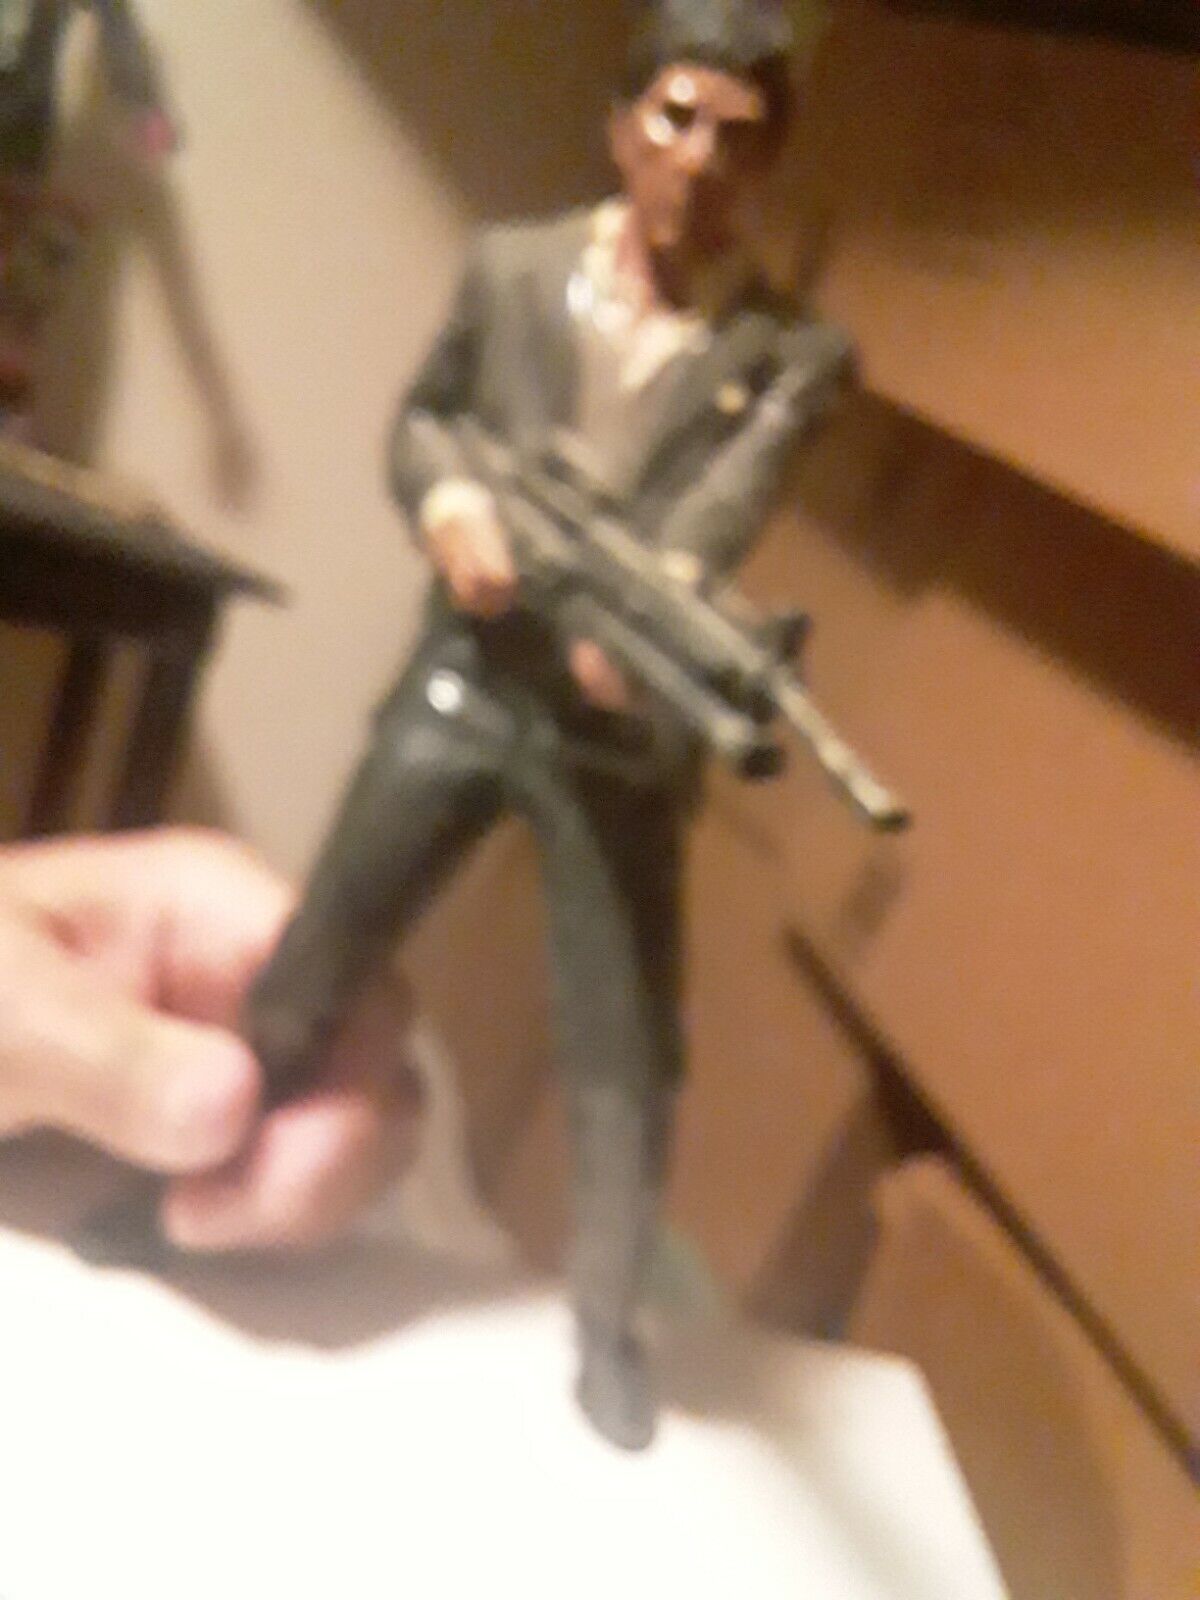 SCARFACE AL PACINO 7 INCH MODEL STATUE HAS TO BE GLUED TO THE BASE NYC PICKUP ON